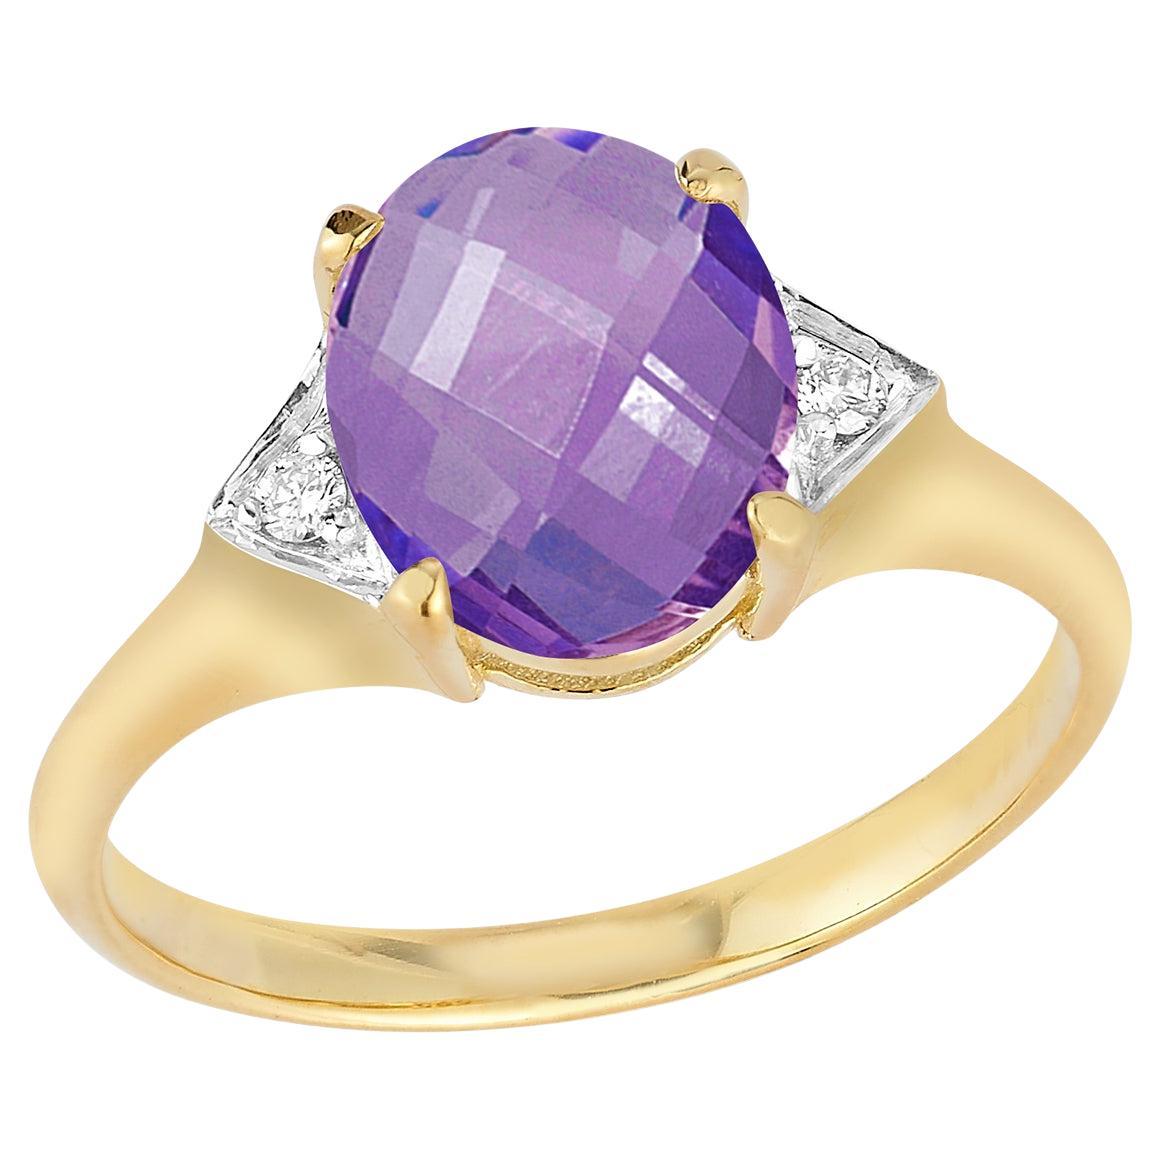 For Sale:  Hand-Crafted 14K Gold 0.05 ct. tw. Diamond & 5.35CT Amethyst Cocktail Ring